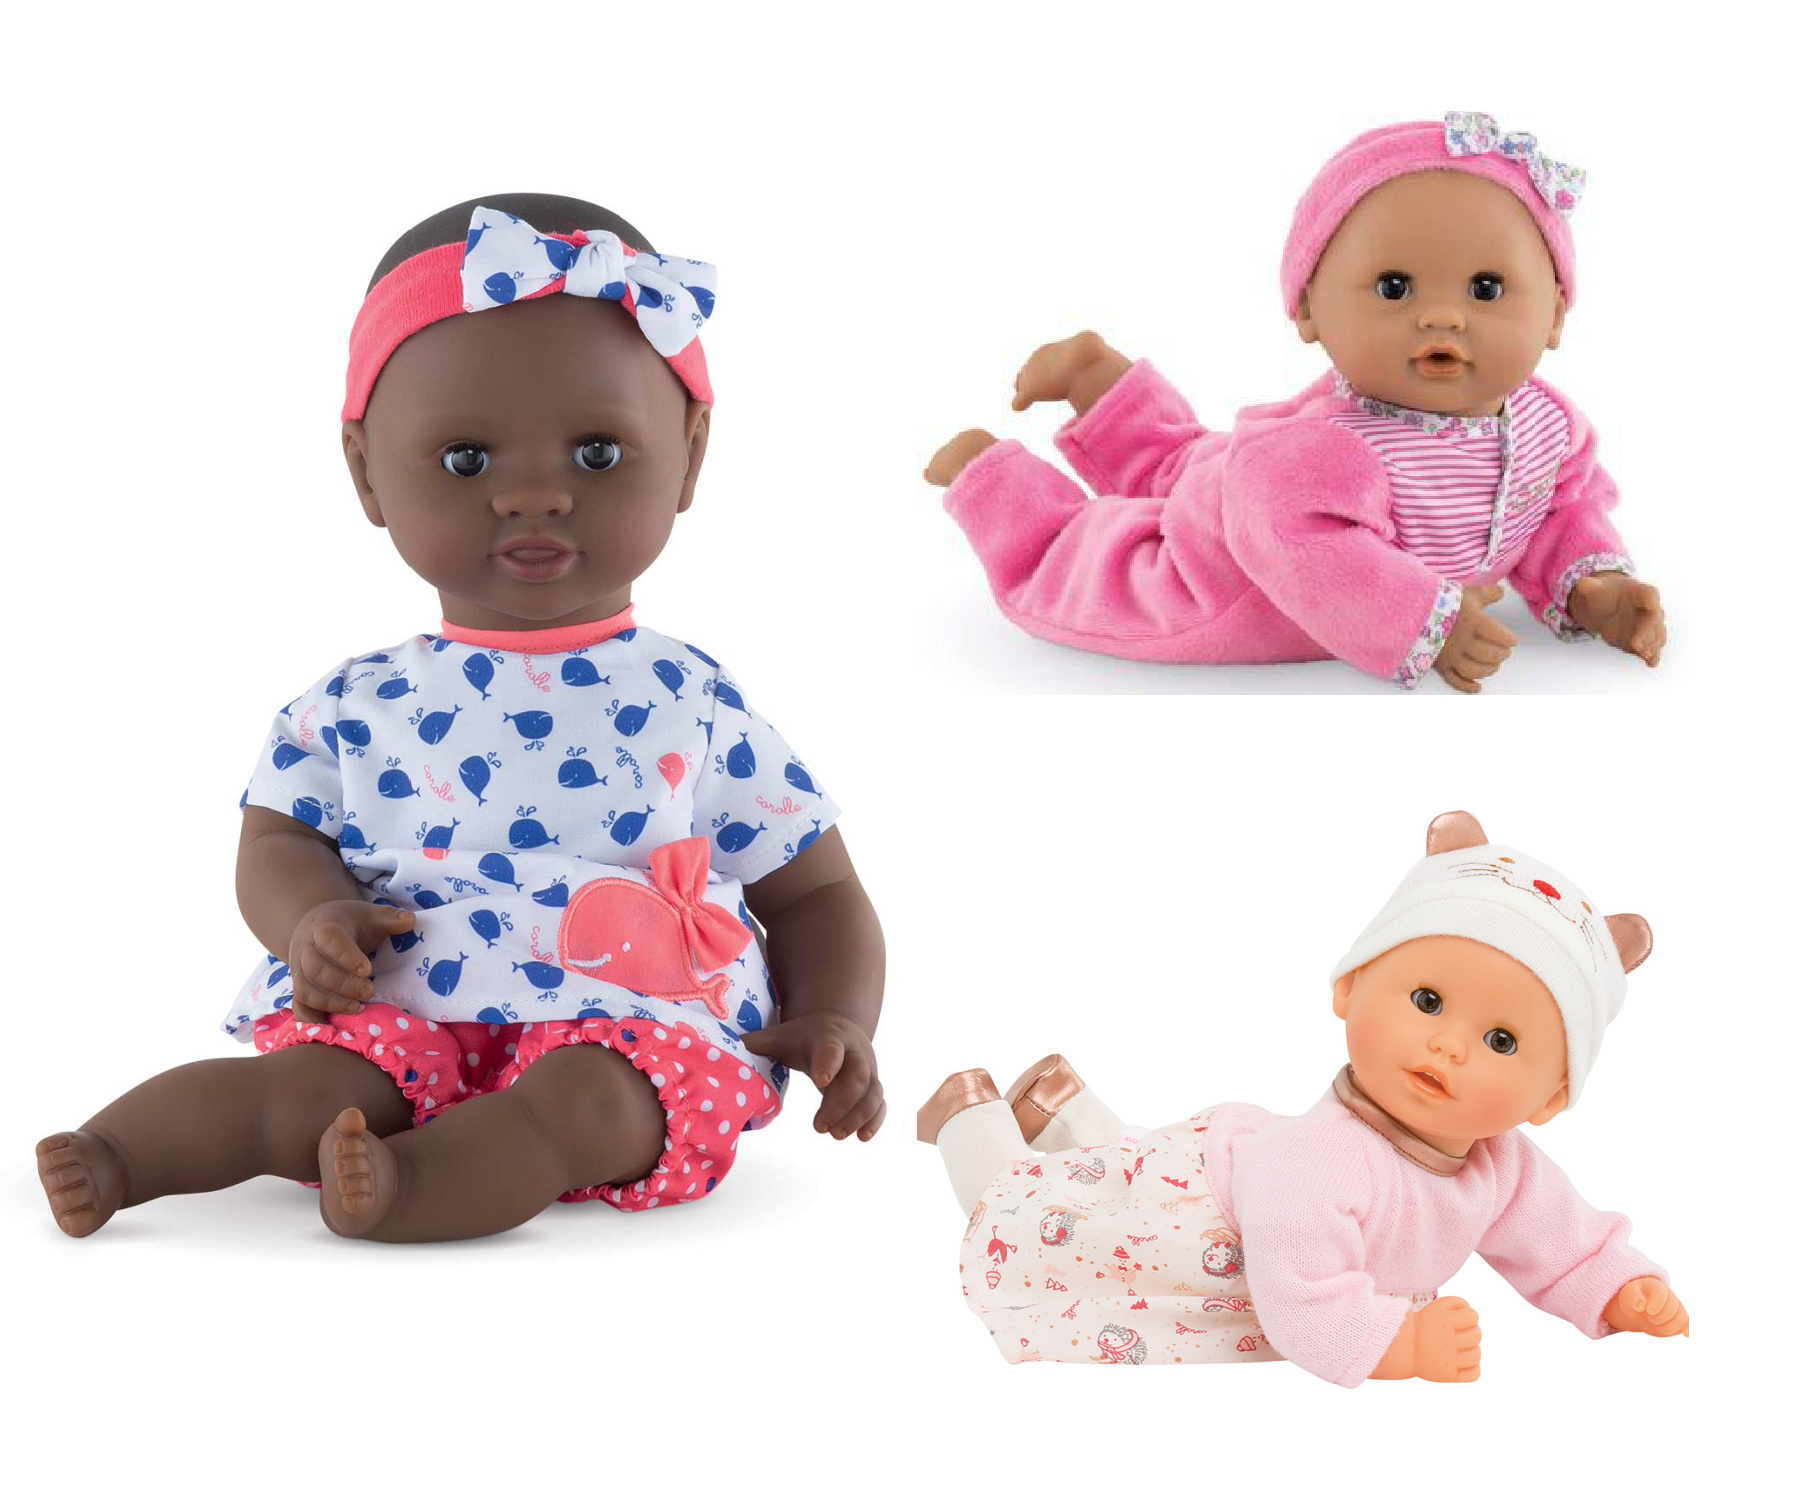 10 best holiday gifts for little kids 3-7 : Corolle BeBe Calin Dolls | Small Business Holiday Gift Guide 2020